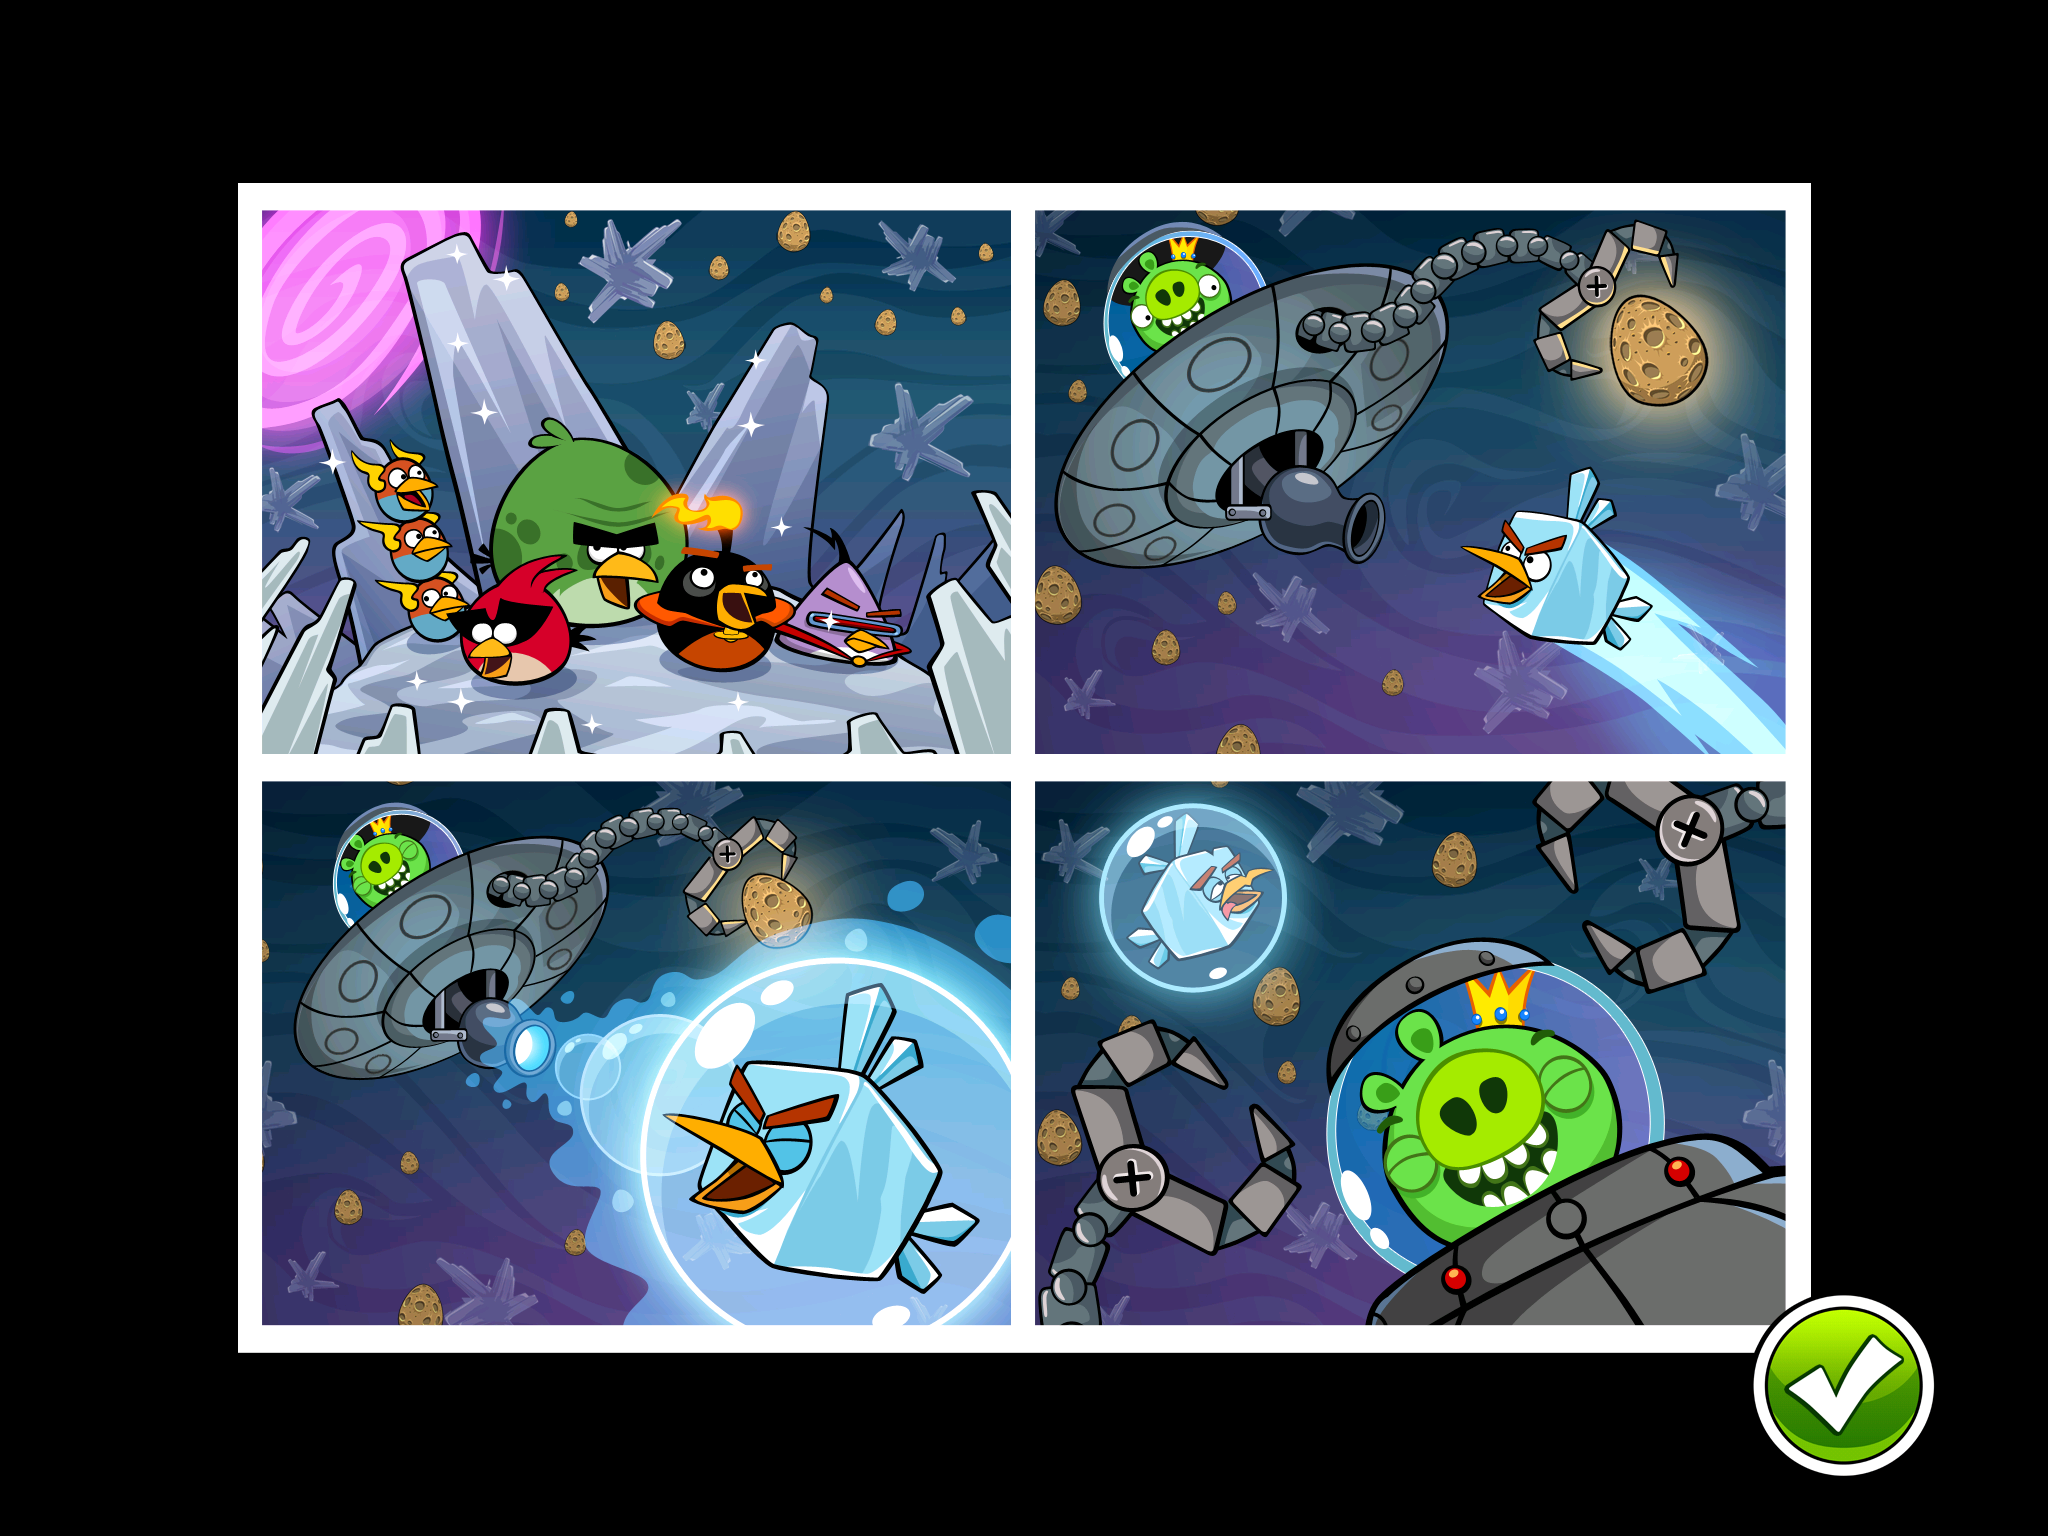 angry birds space 5 20